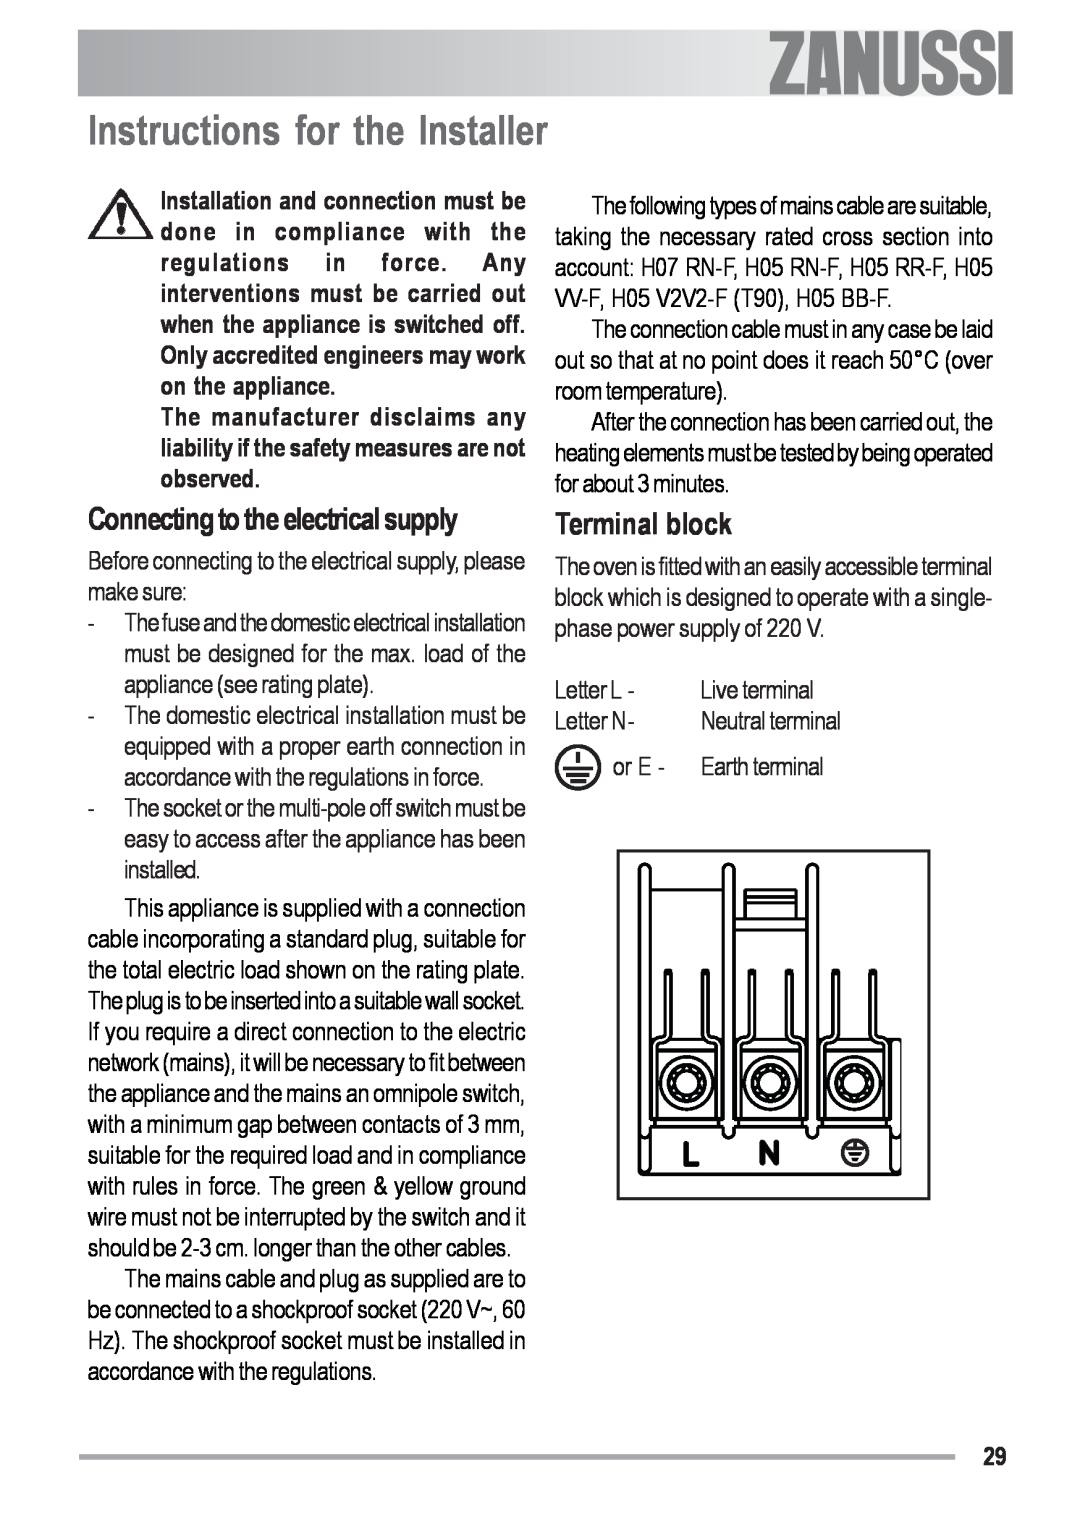 Zanussi ZOB 691 Instructions for the Installer, Terminal block, Connecting to the electrical supply, Letter L, Letter N 